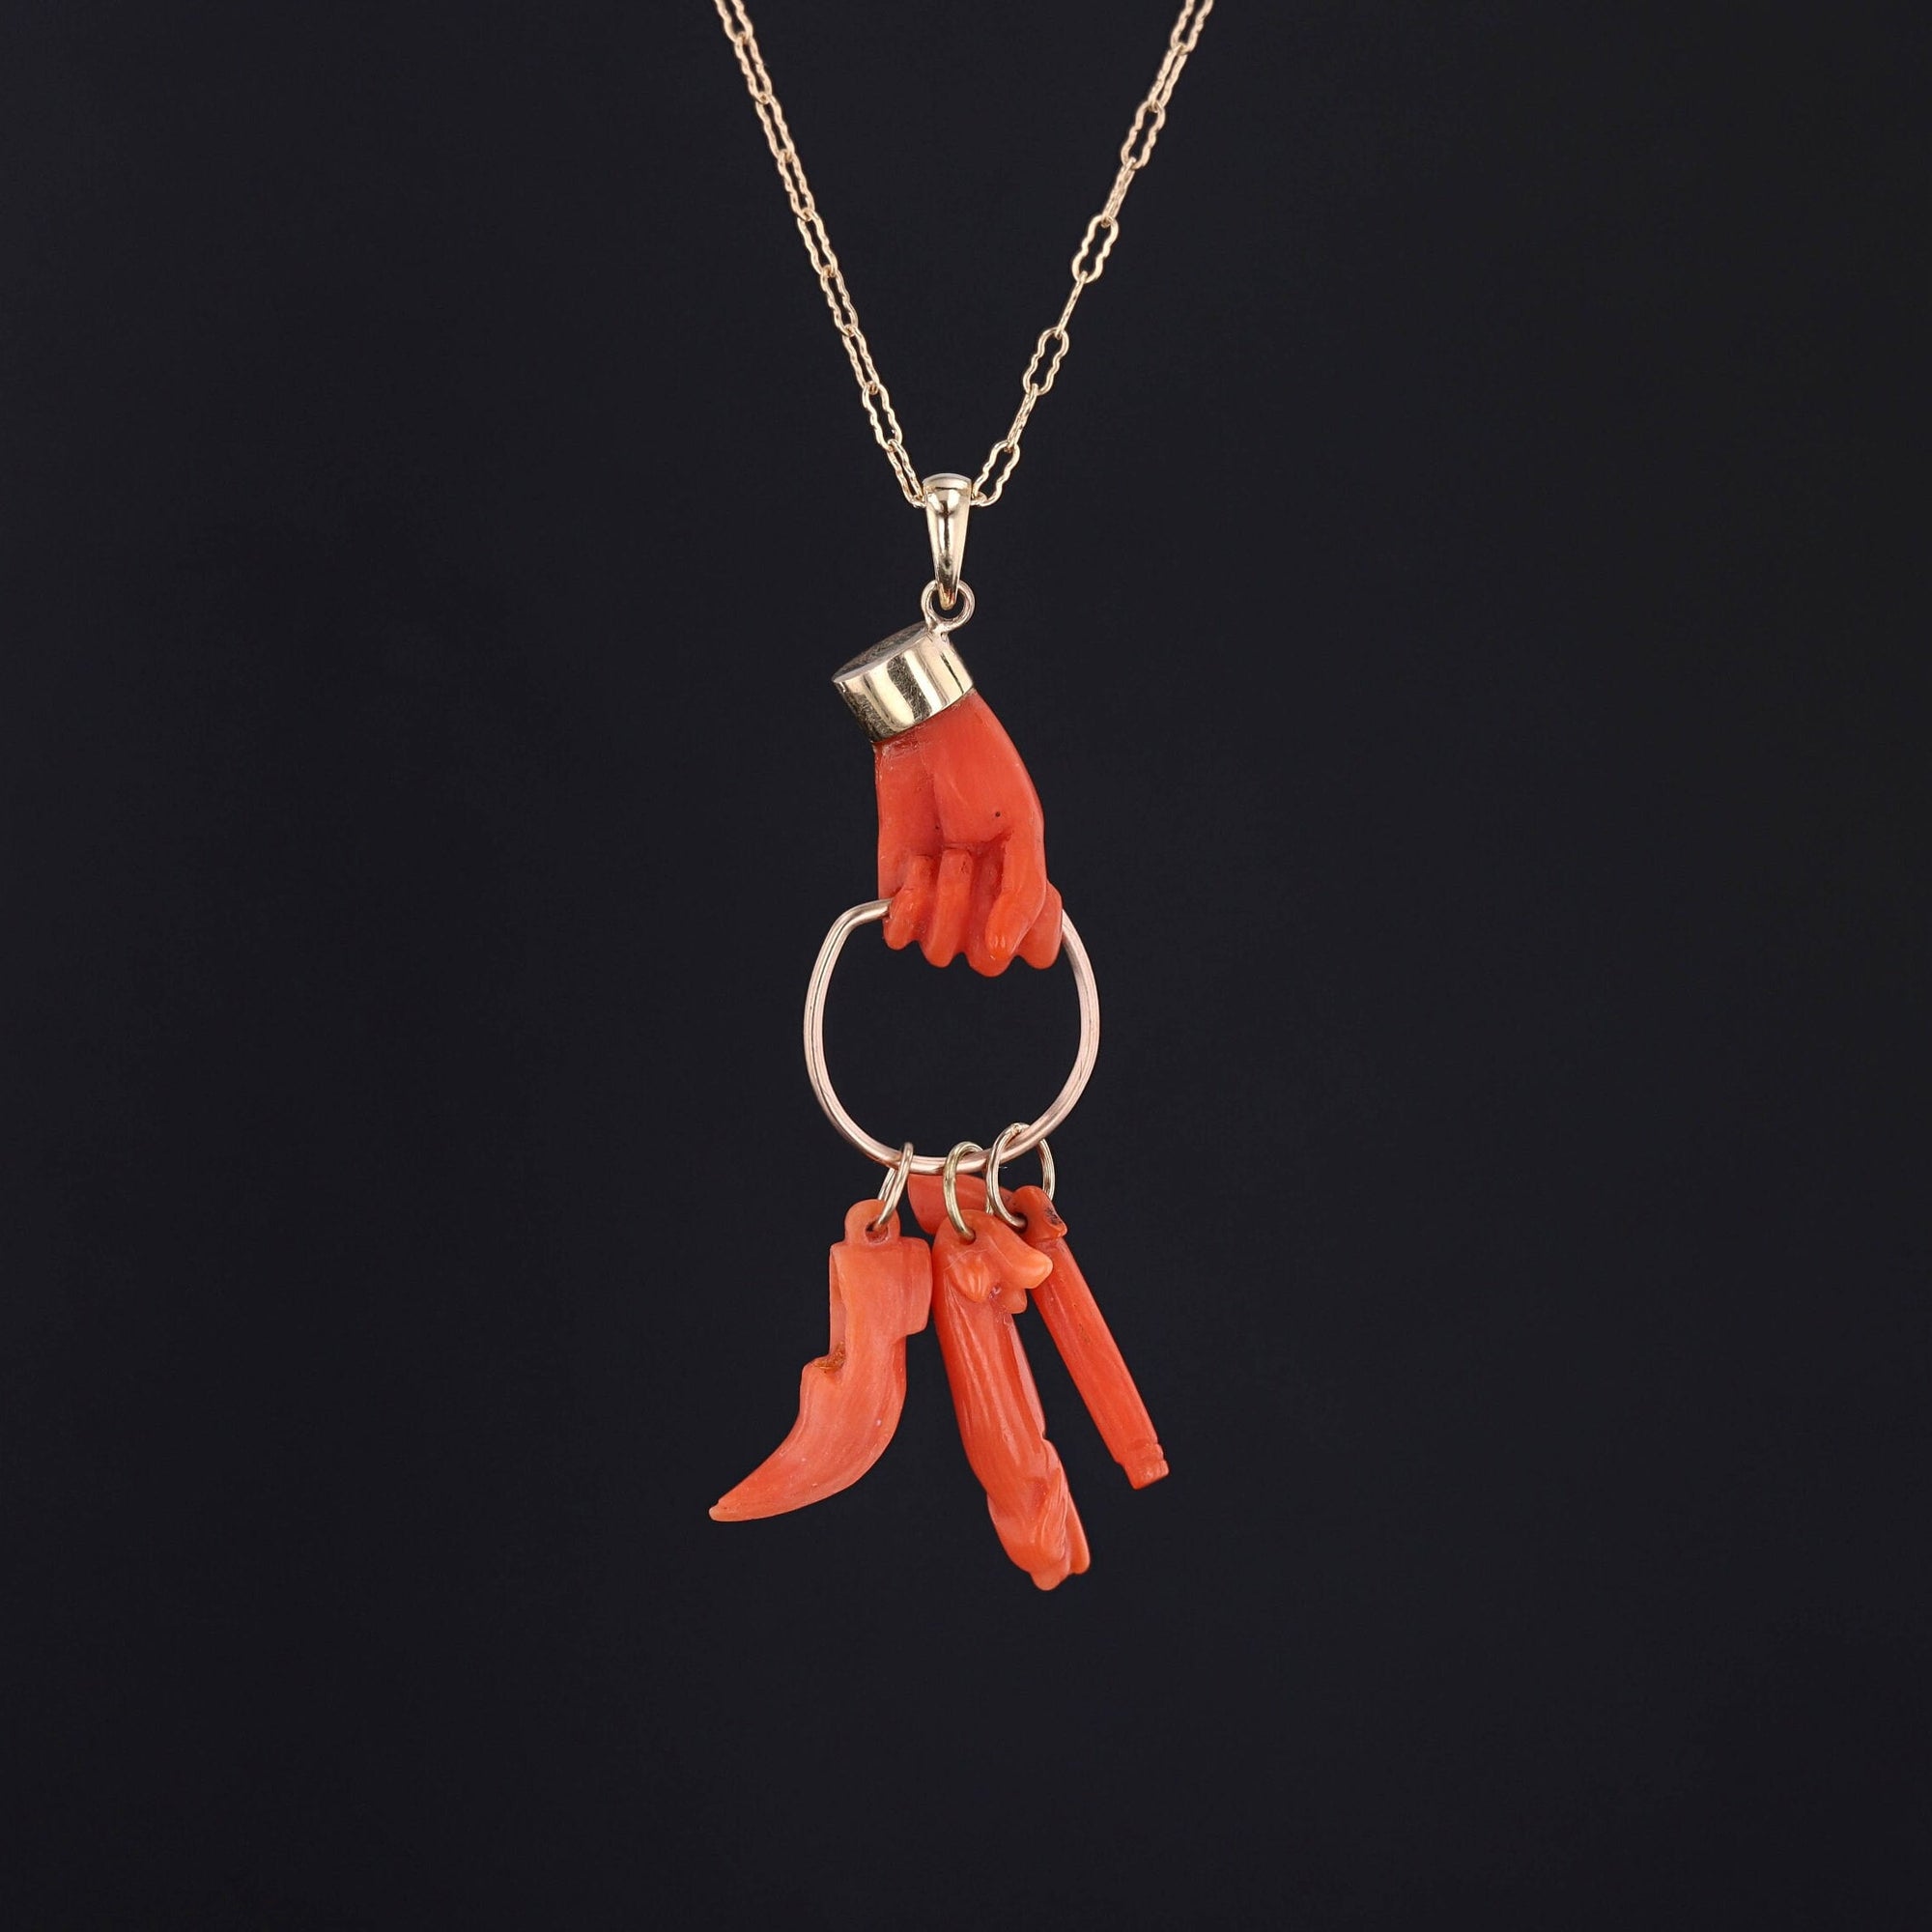 Antique Coral Hand Pendant of 14k Gold